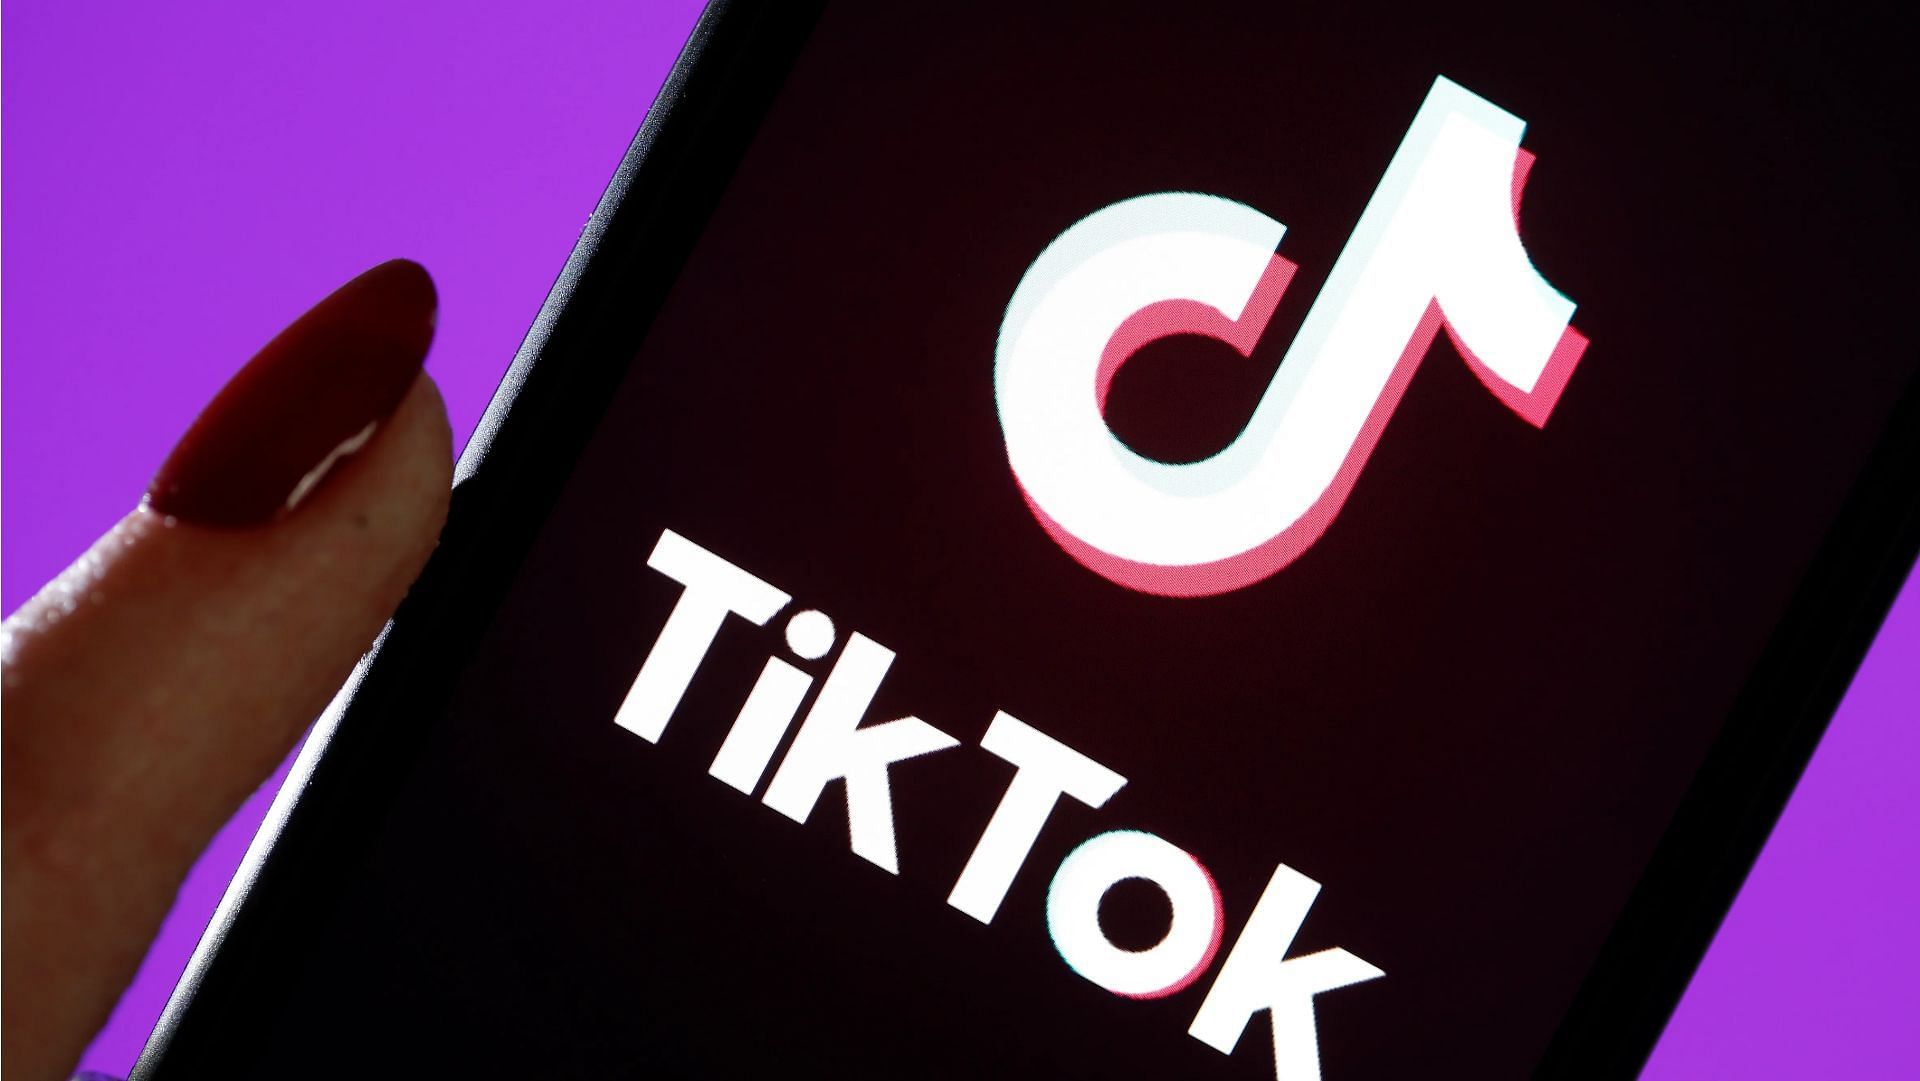 TikTok has been crashing for thousands of users. (Image via Chesnot/Getty)